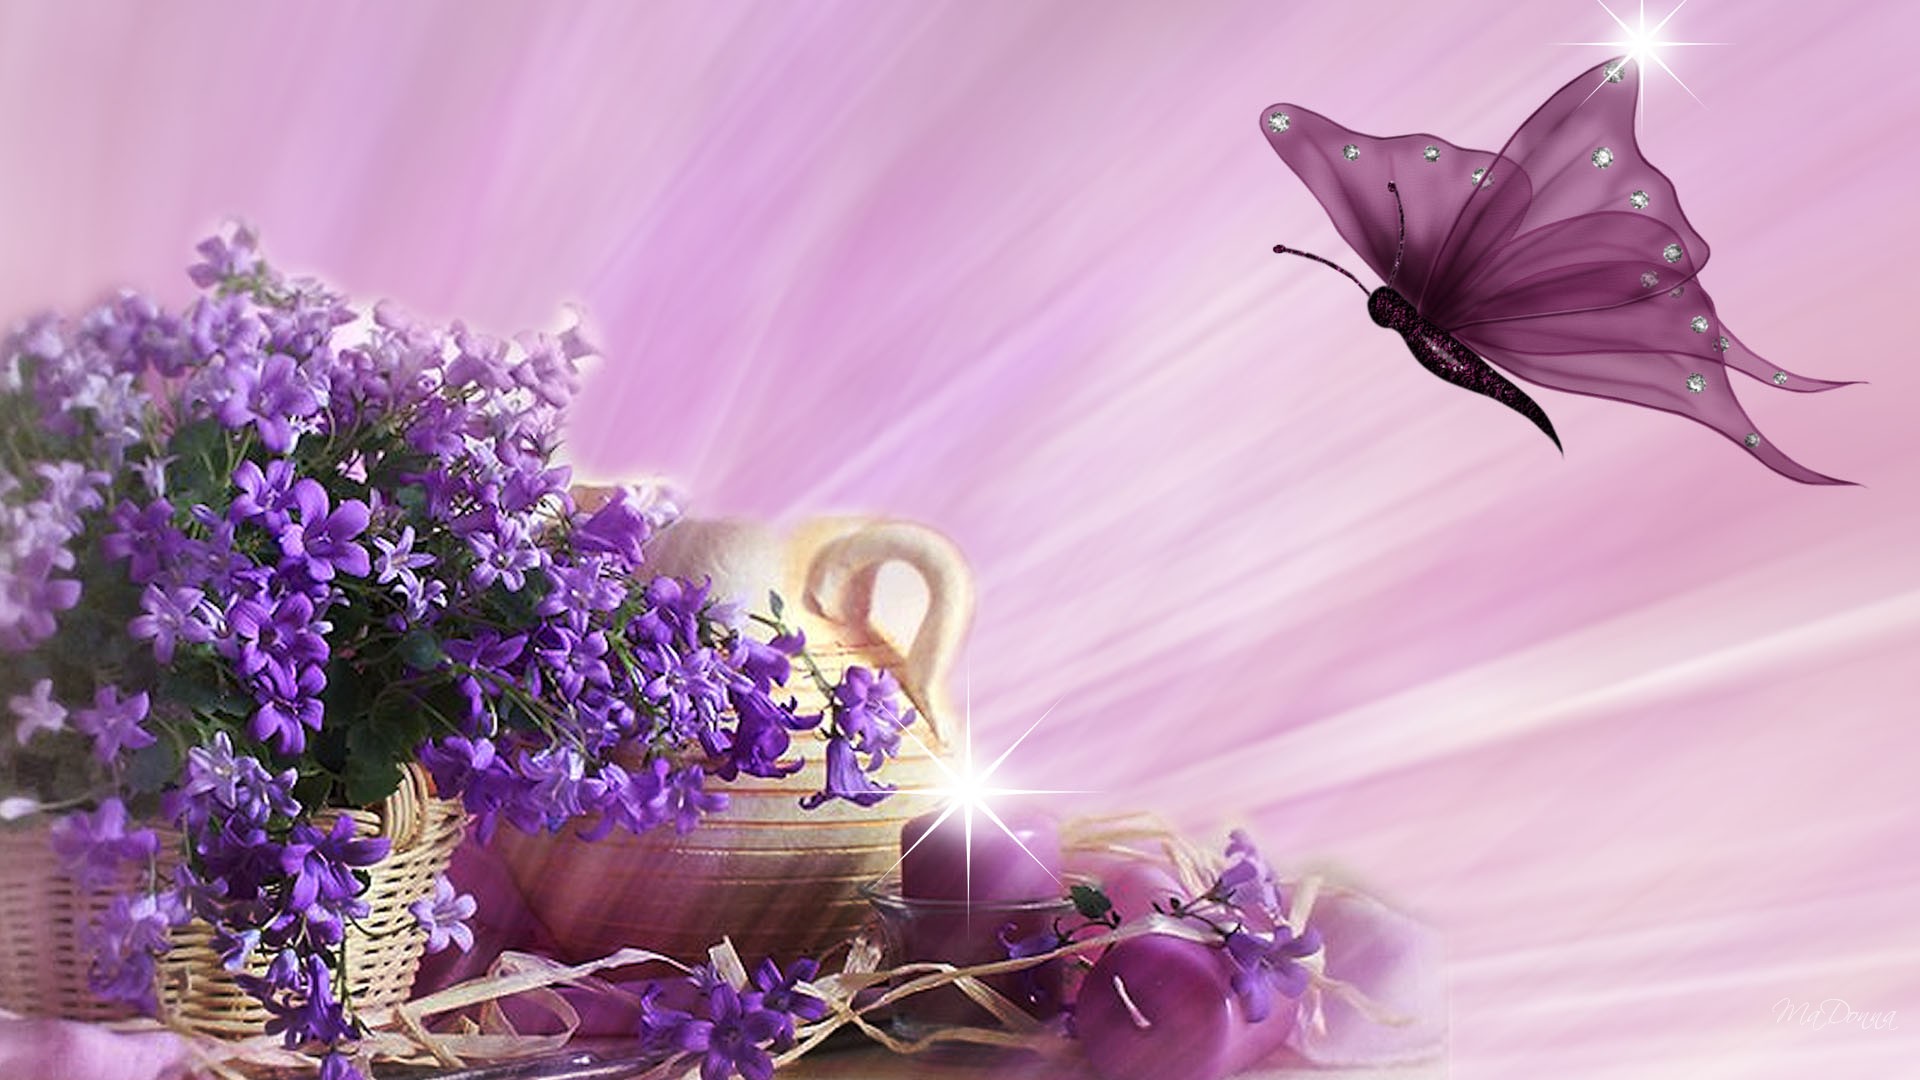 FunMozar Spring Flowers And Butterflies Wallpapers 1920x1080